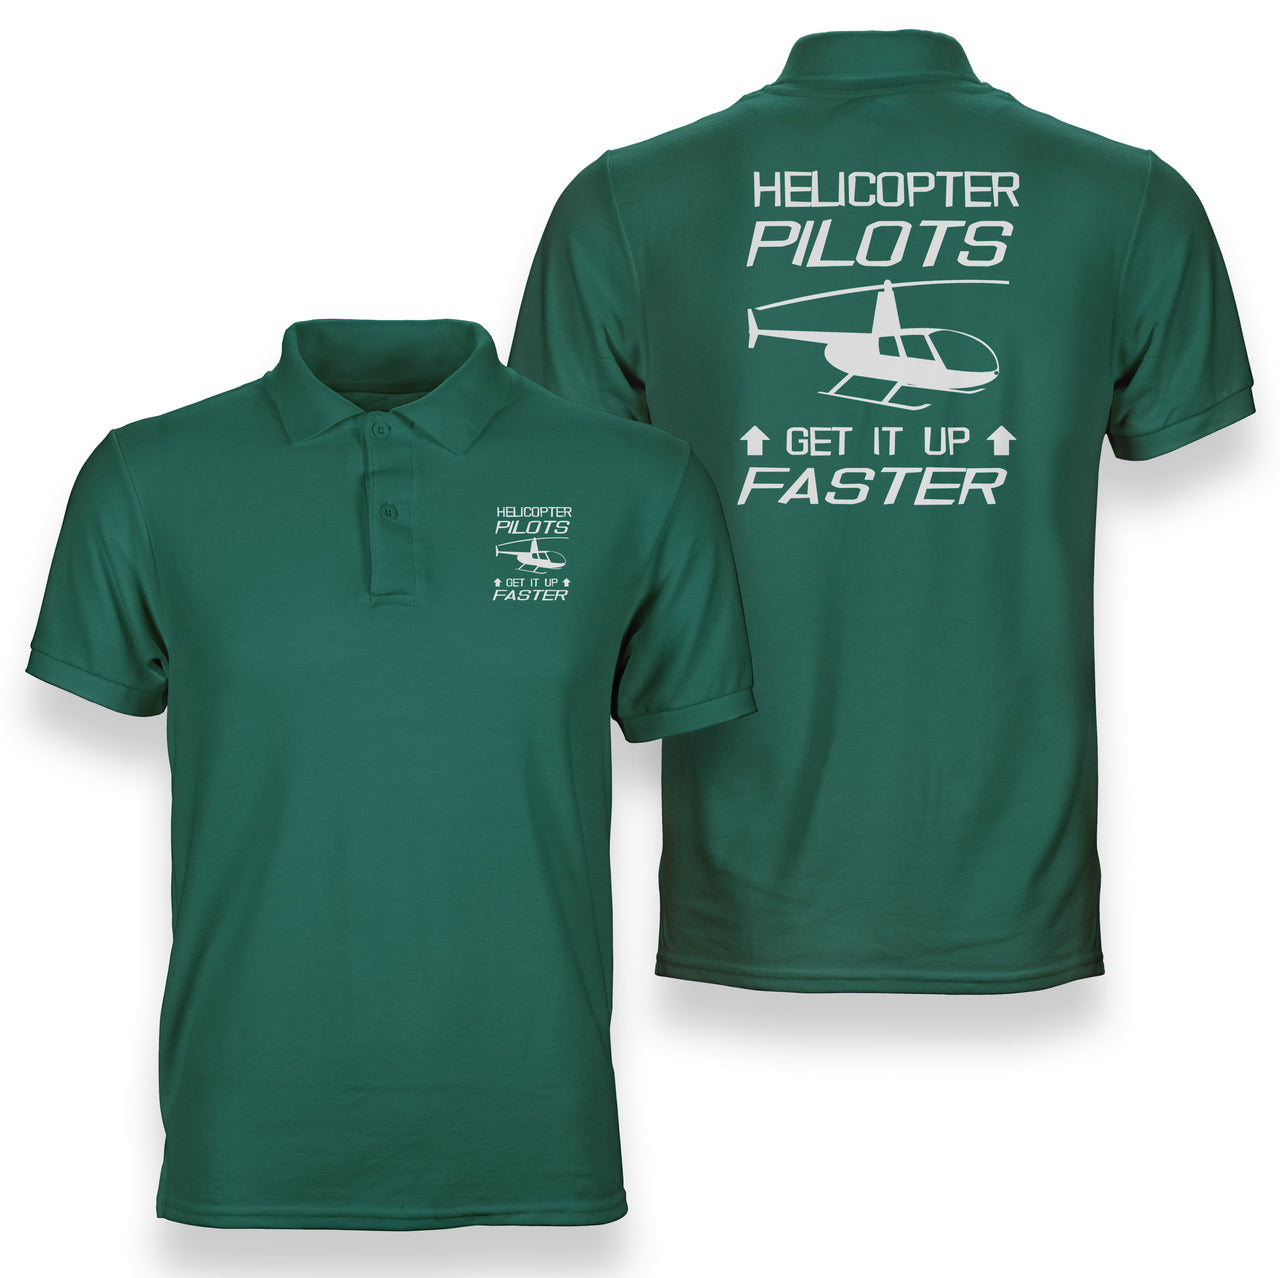 Helicopter Pilots Get It Up Faster Designed Double Side Polo T-Shirts